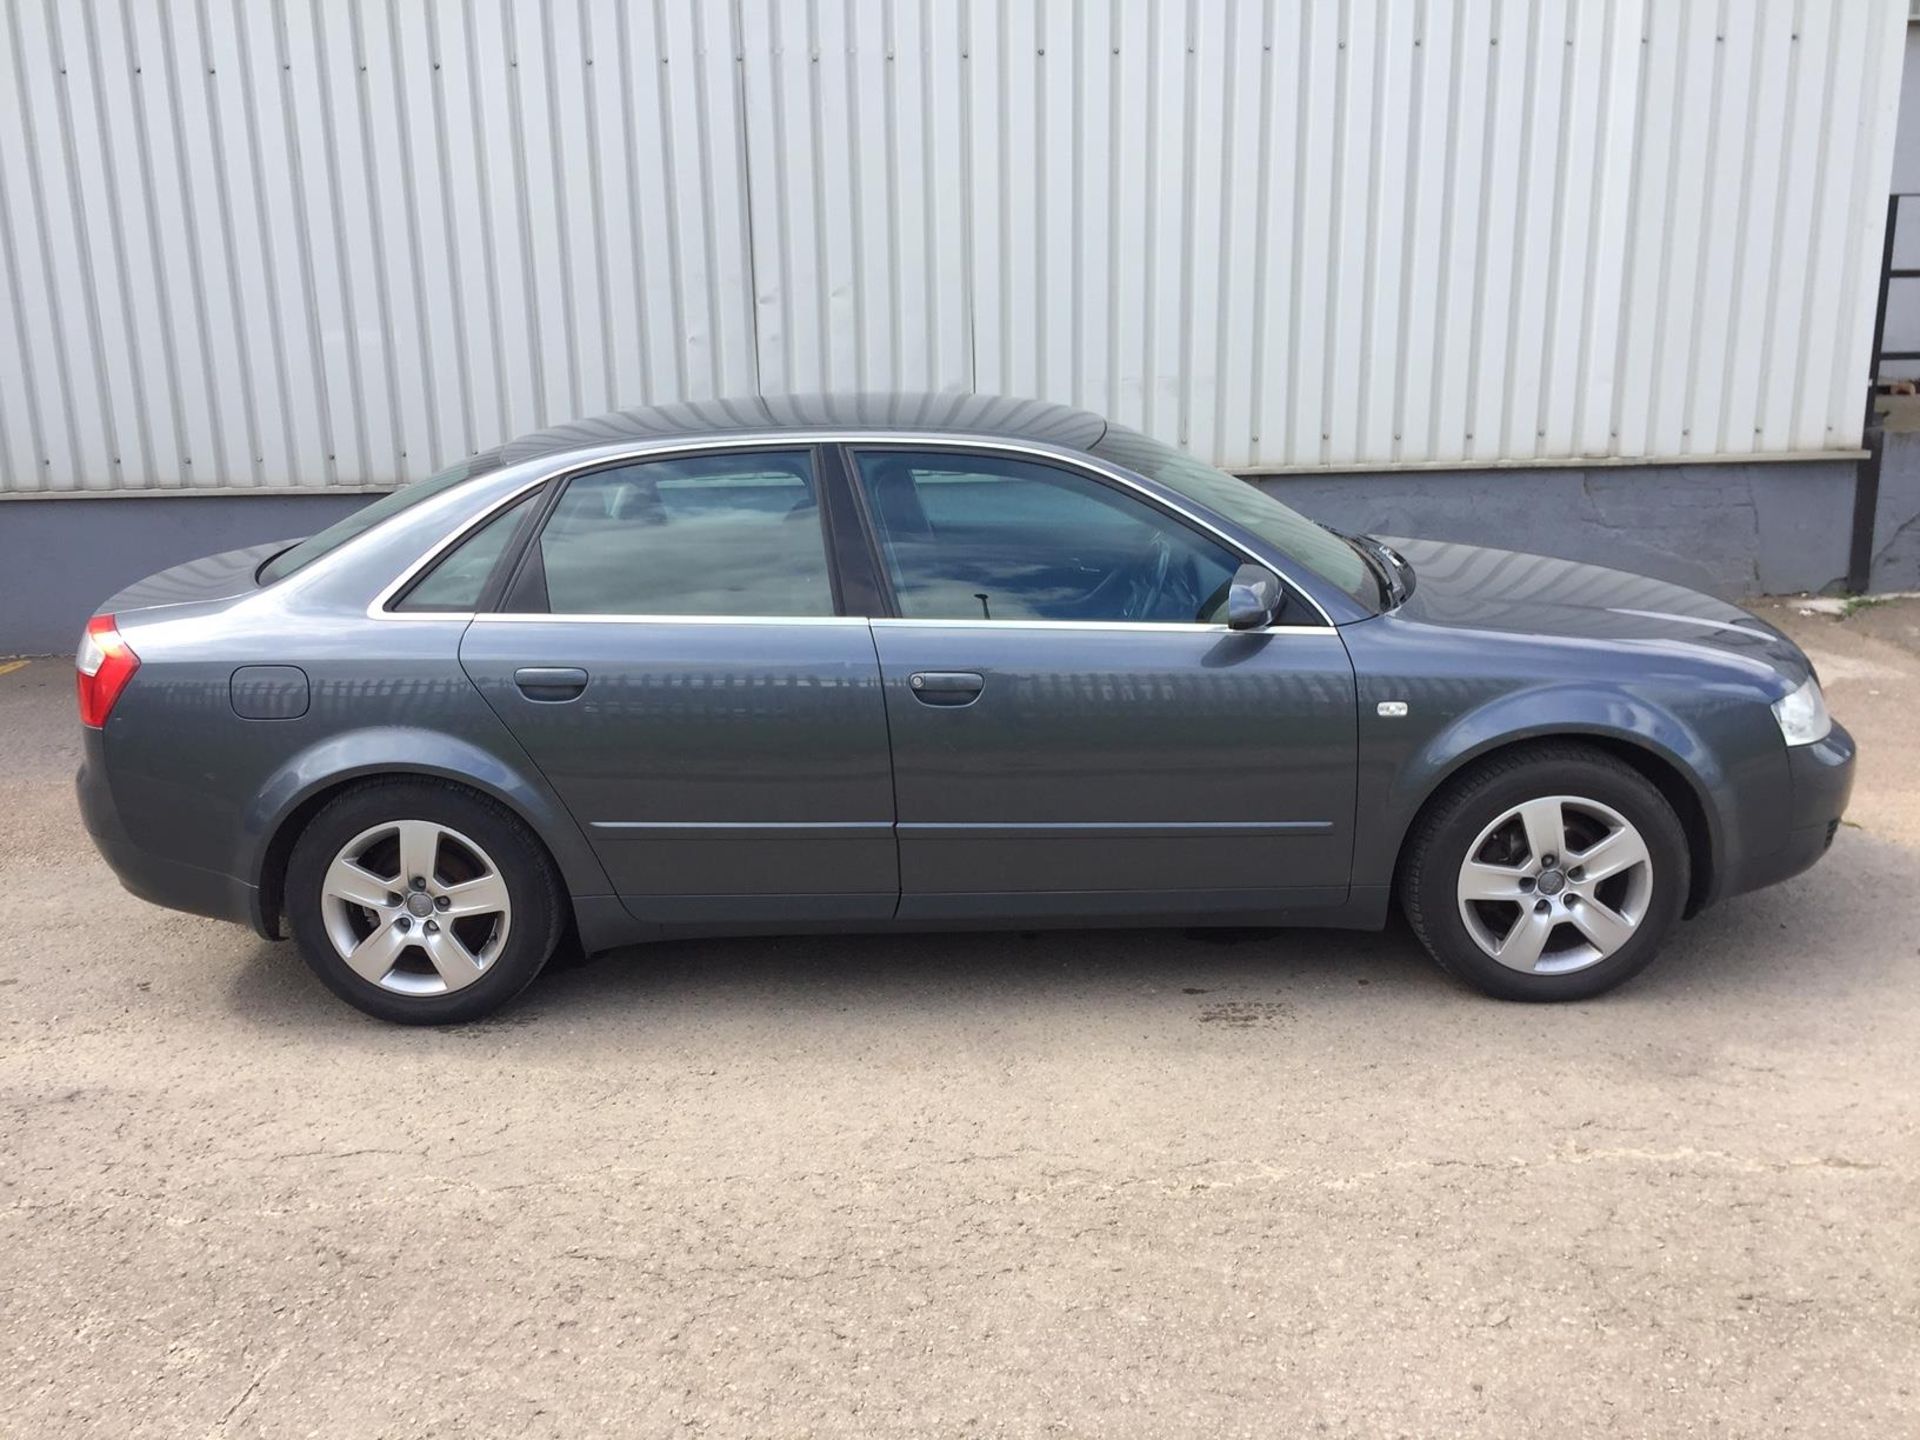 2003 Audi A4 Quattro 1.9 Tdi SE 4 Dr Saloon - CL505 - NO VAT ON THE HAMMER - Location: Corby, Northa - Image 14 of 15